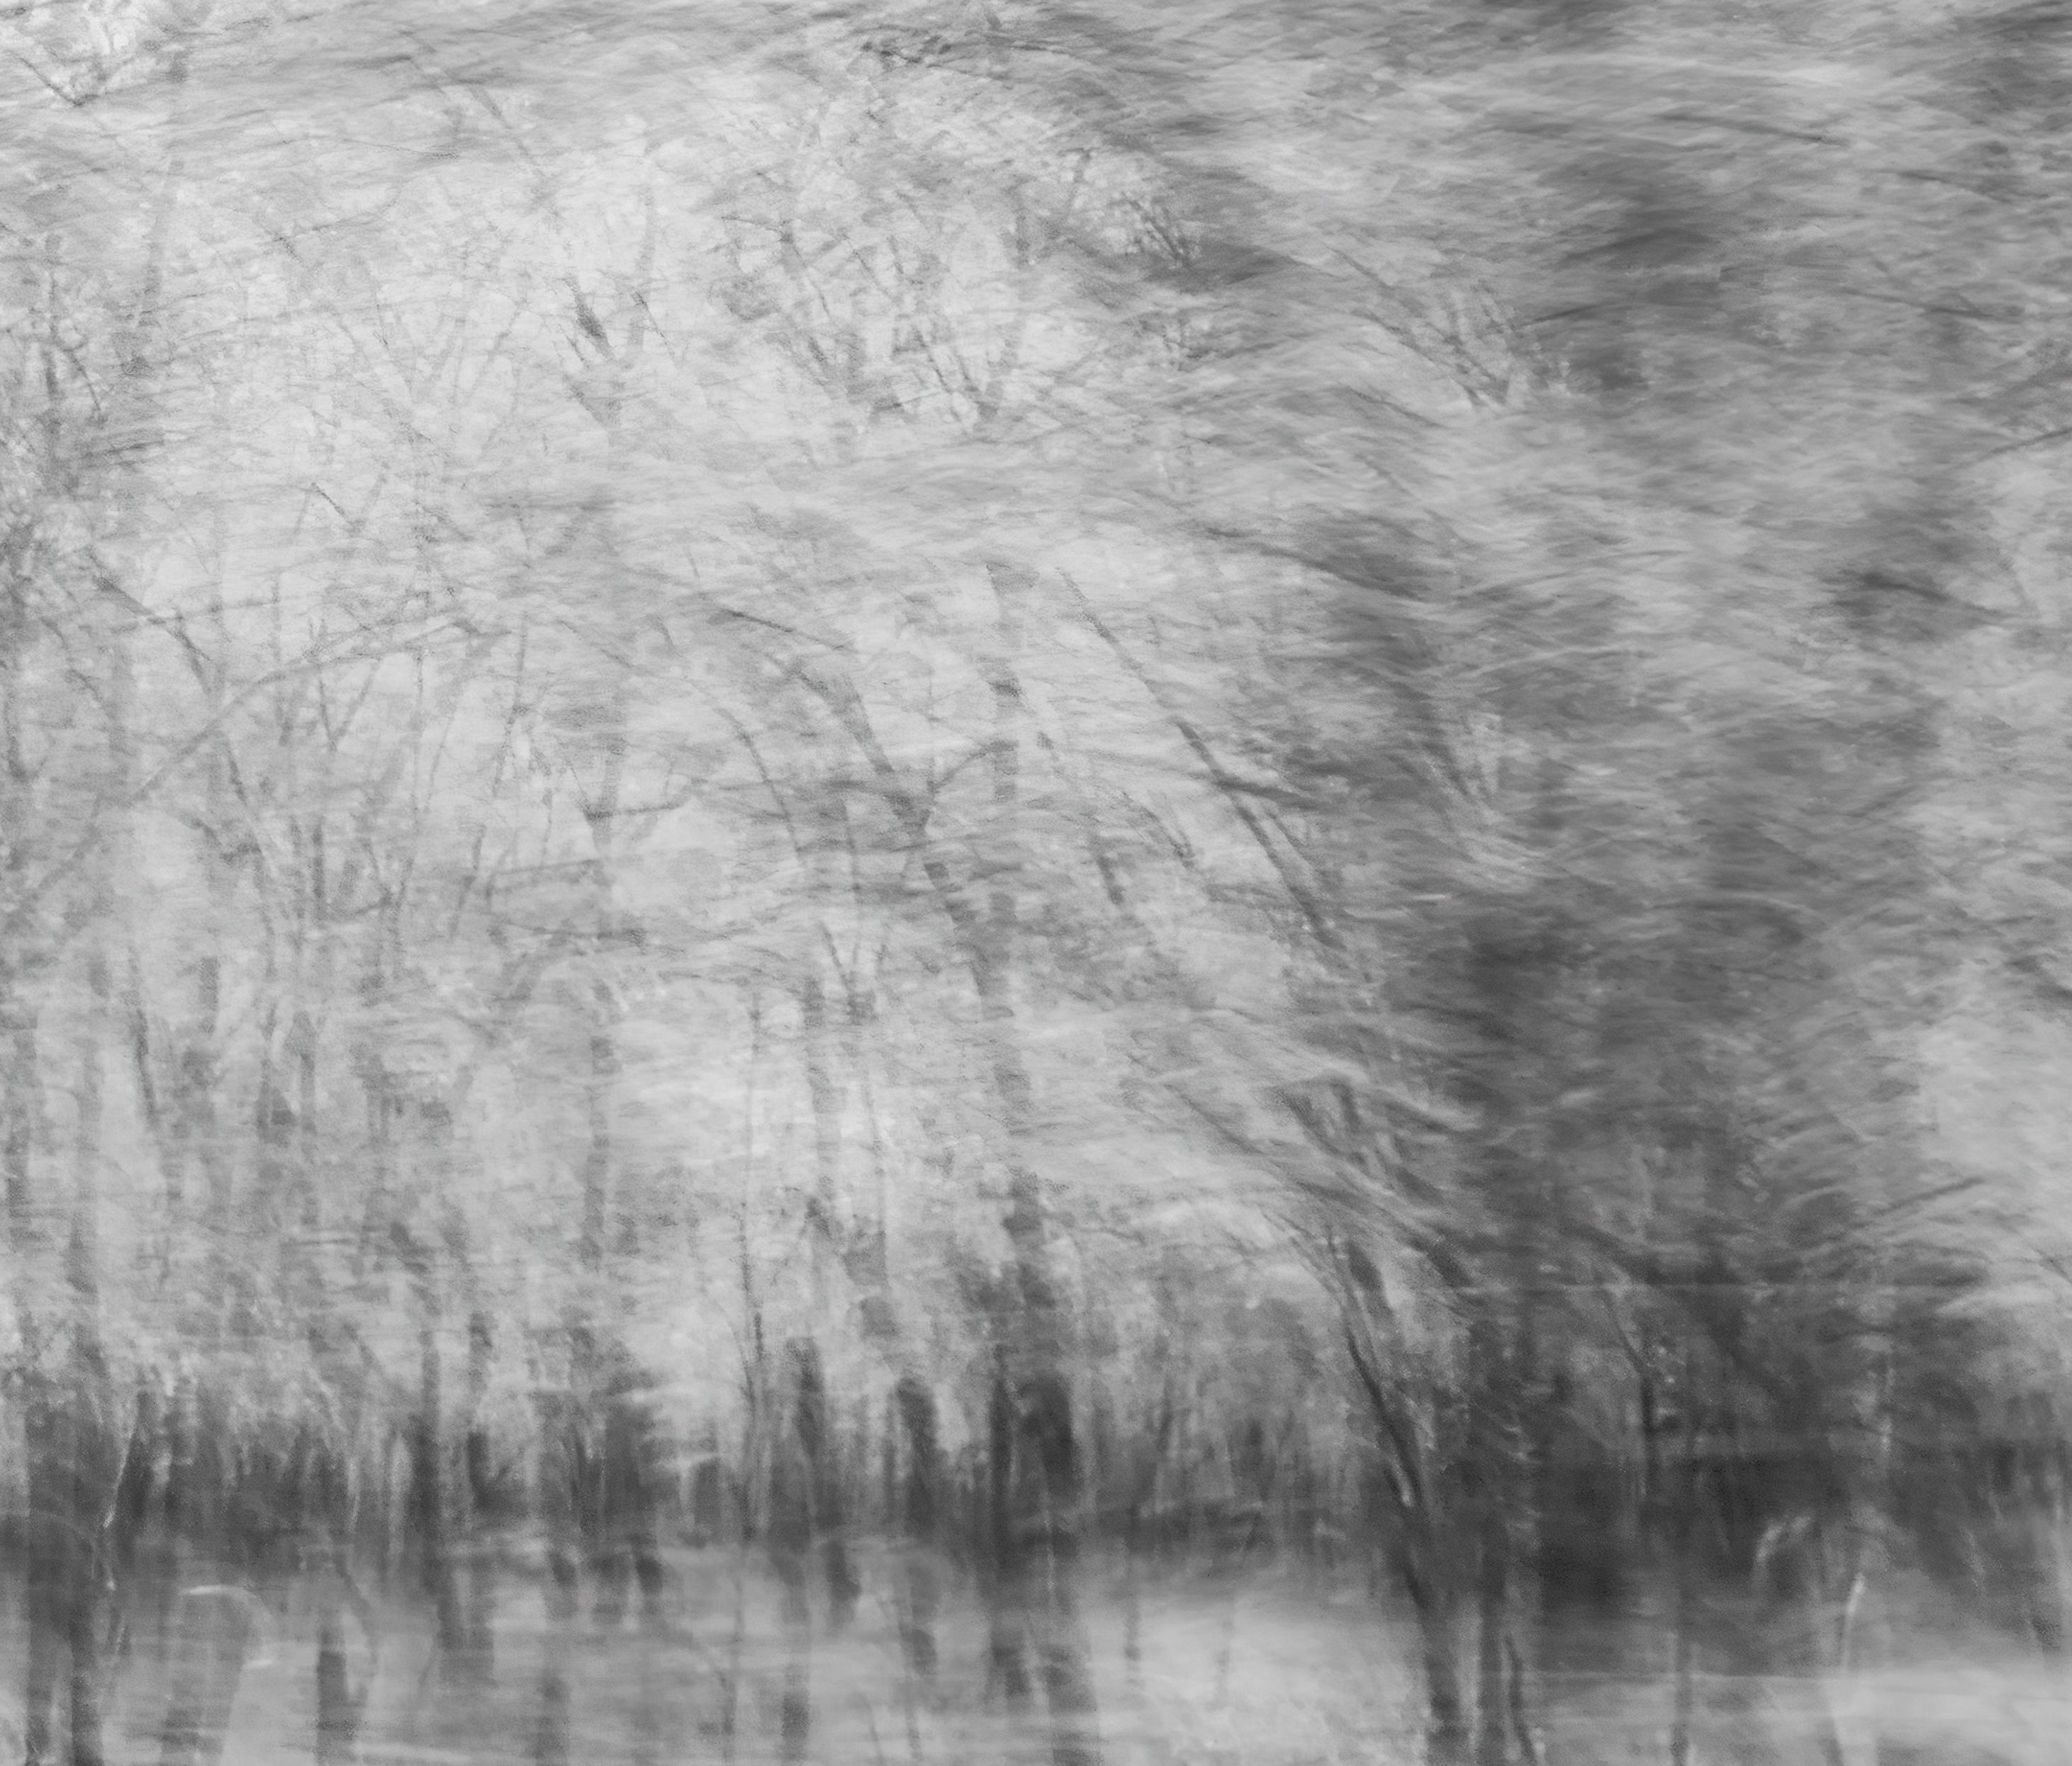  Landscape Photograph Nature Large Abstract Trees Wildlife India Black White - Gray Abstract Photograph by Aditya Dicky Singh